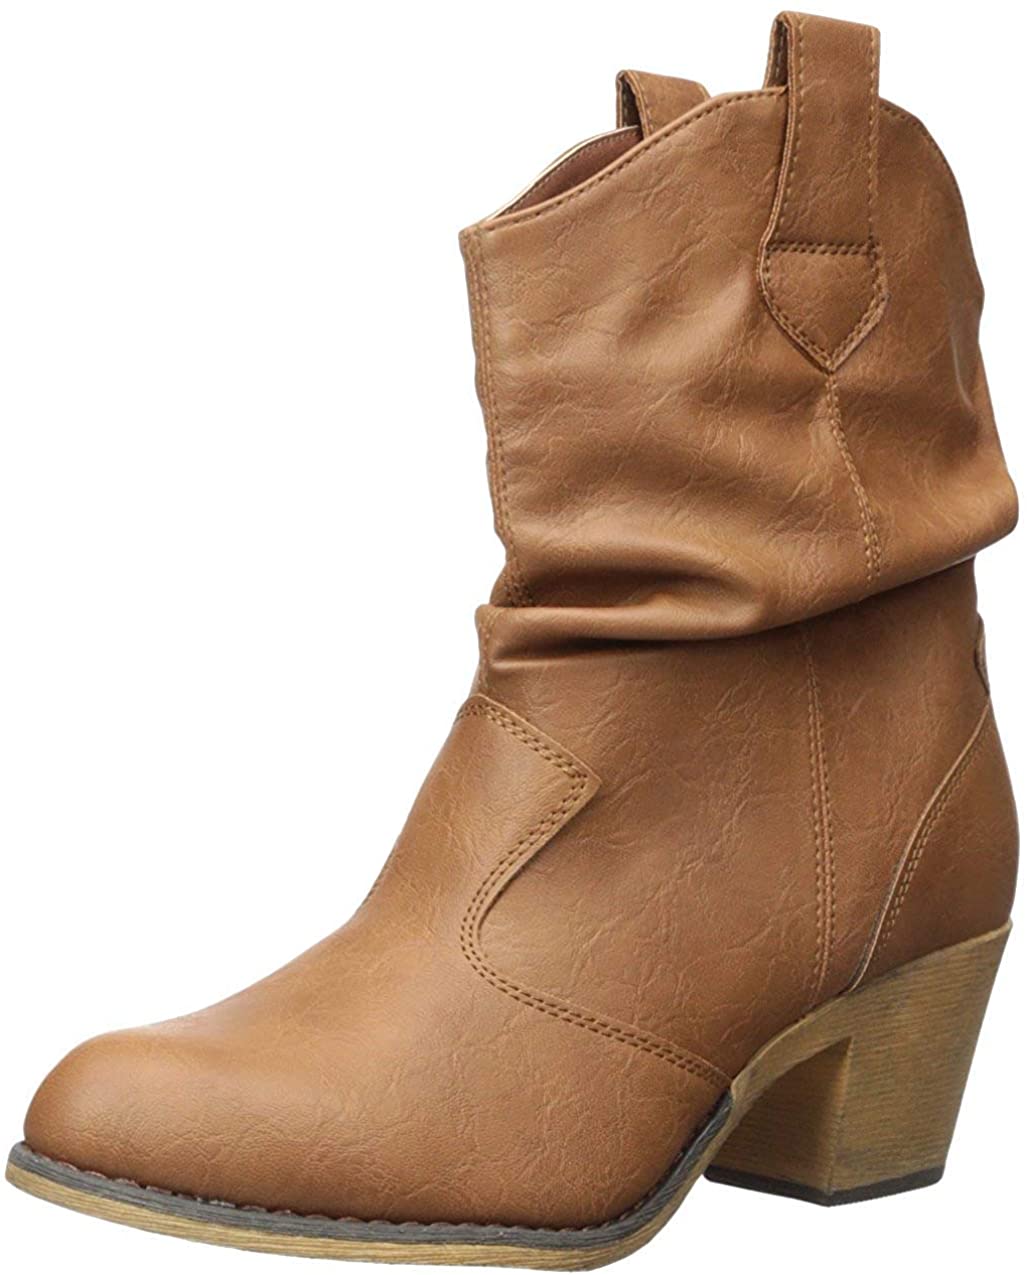 Women's Modern Western Cowboy Distressed Cognac Boot with Pull-Up Tabs